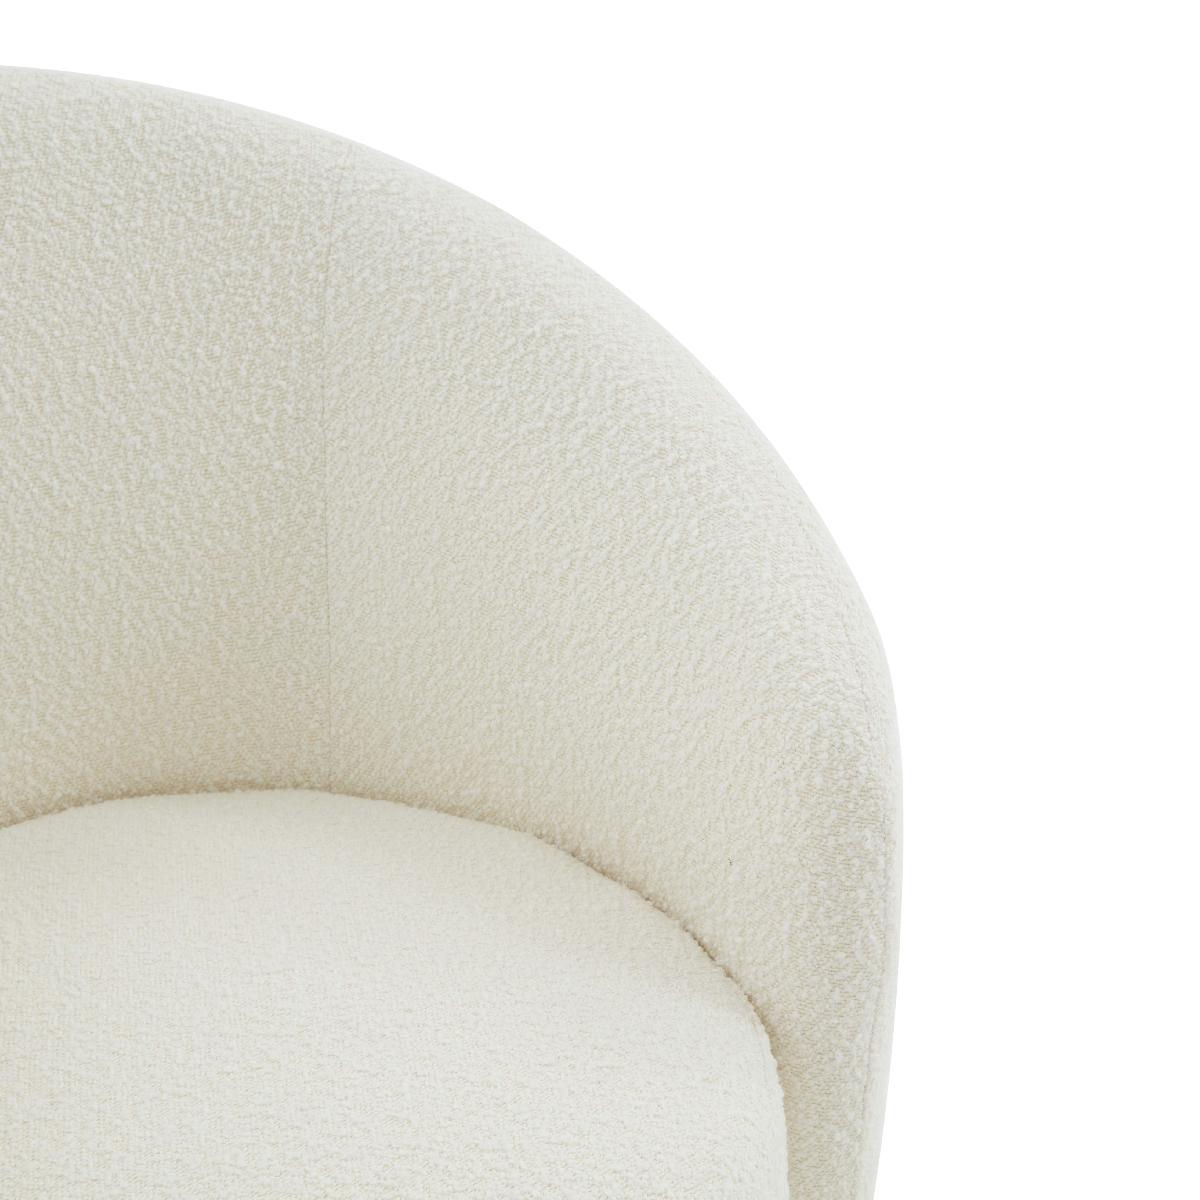 Safavieh Couture Danianna Boucle Accent Chair - Ivory